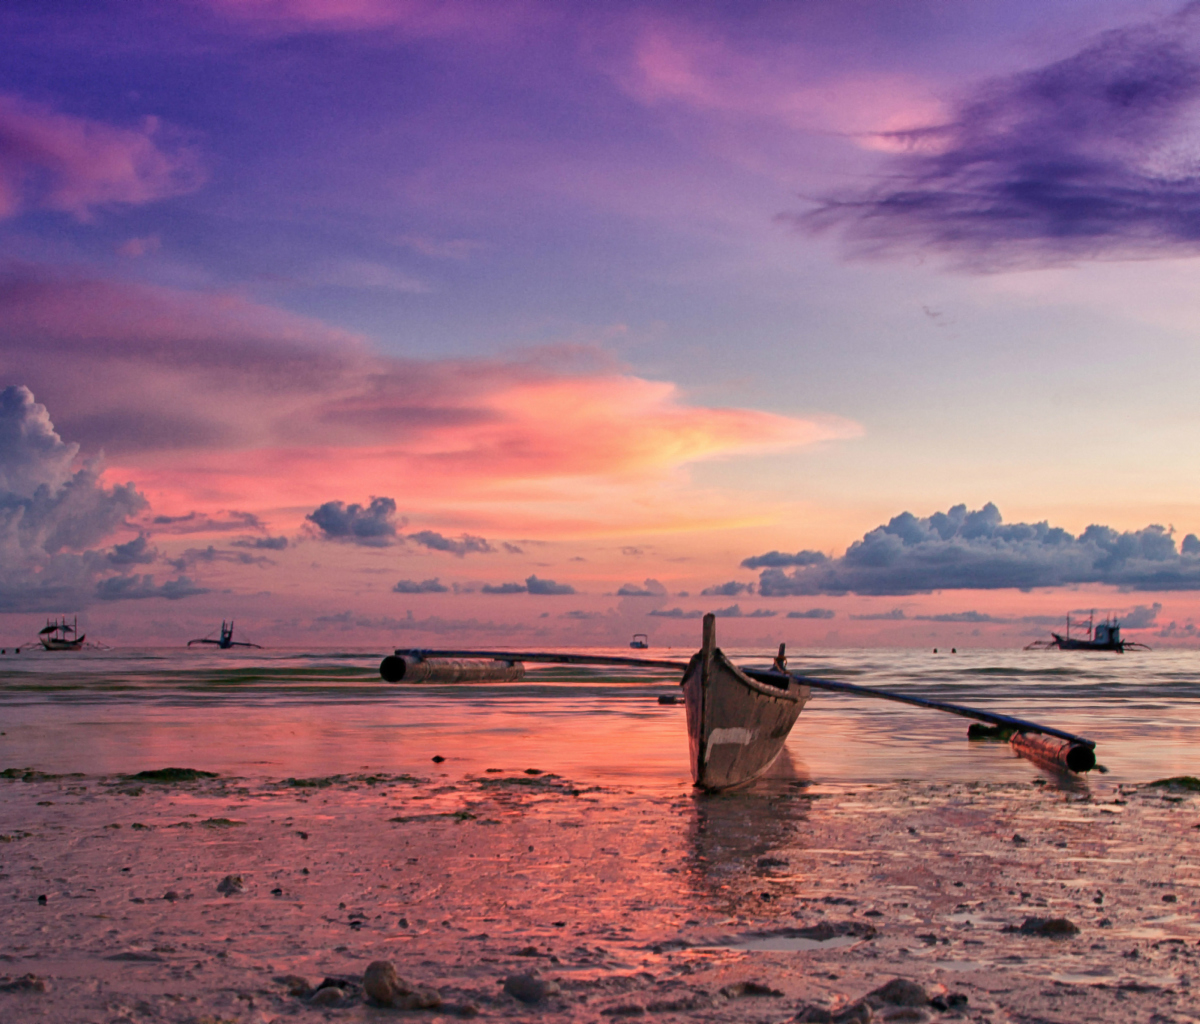 Das Pink Sunset And Boat At Beach In Philippines Wallpaper 1200x1024